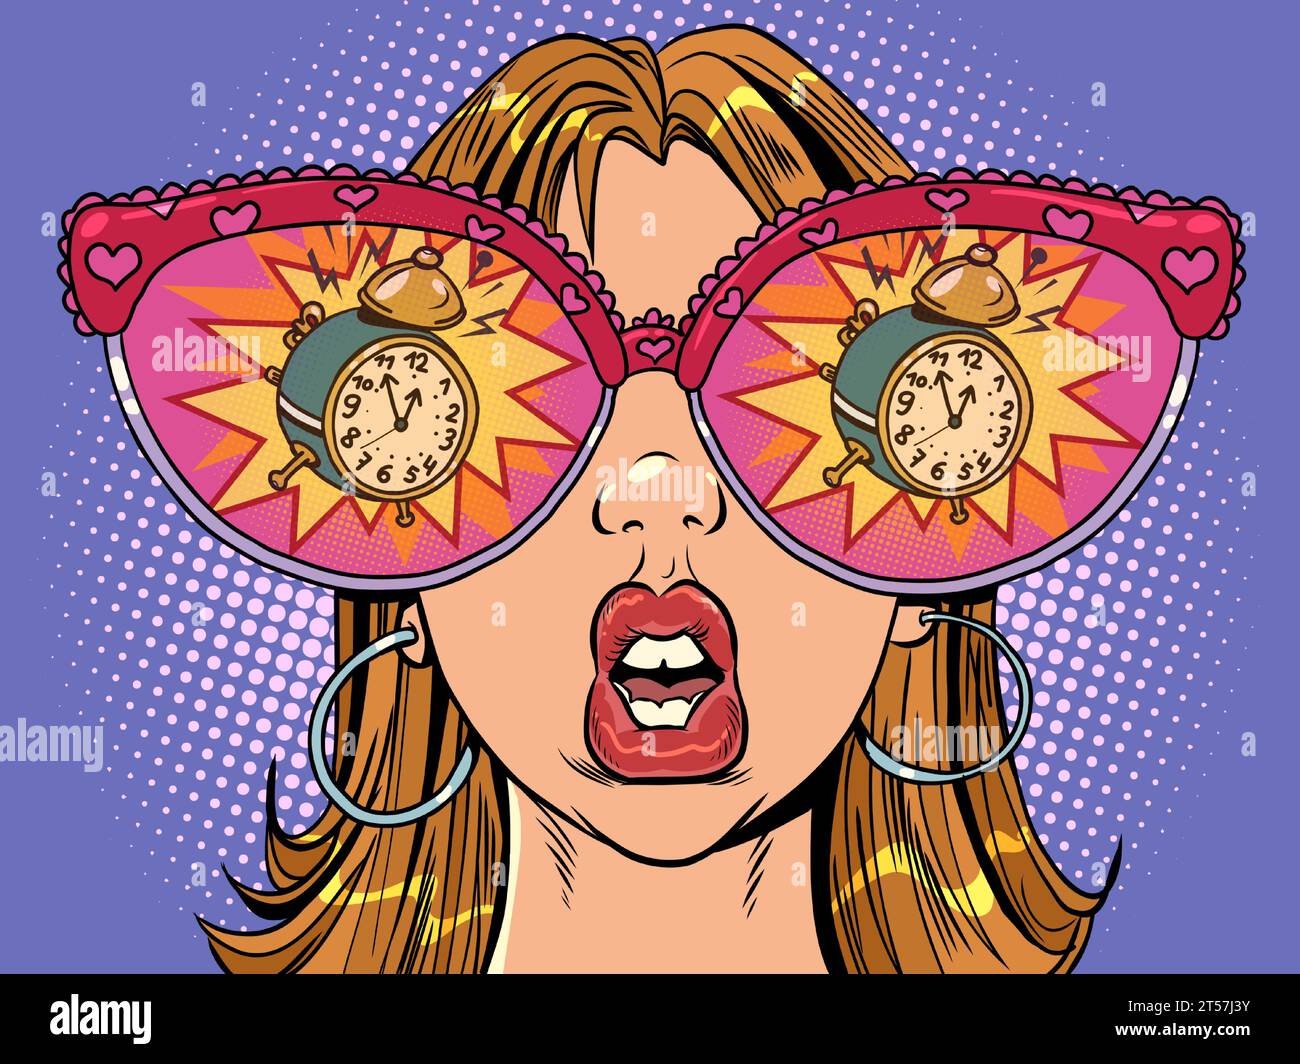 Staying late for an important event and realizing it too late. Huge glasses and reflection in them. A woman with glasses looks at the alarm clock. Com Stock Vector